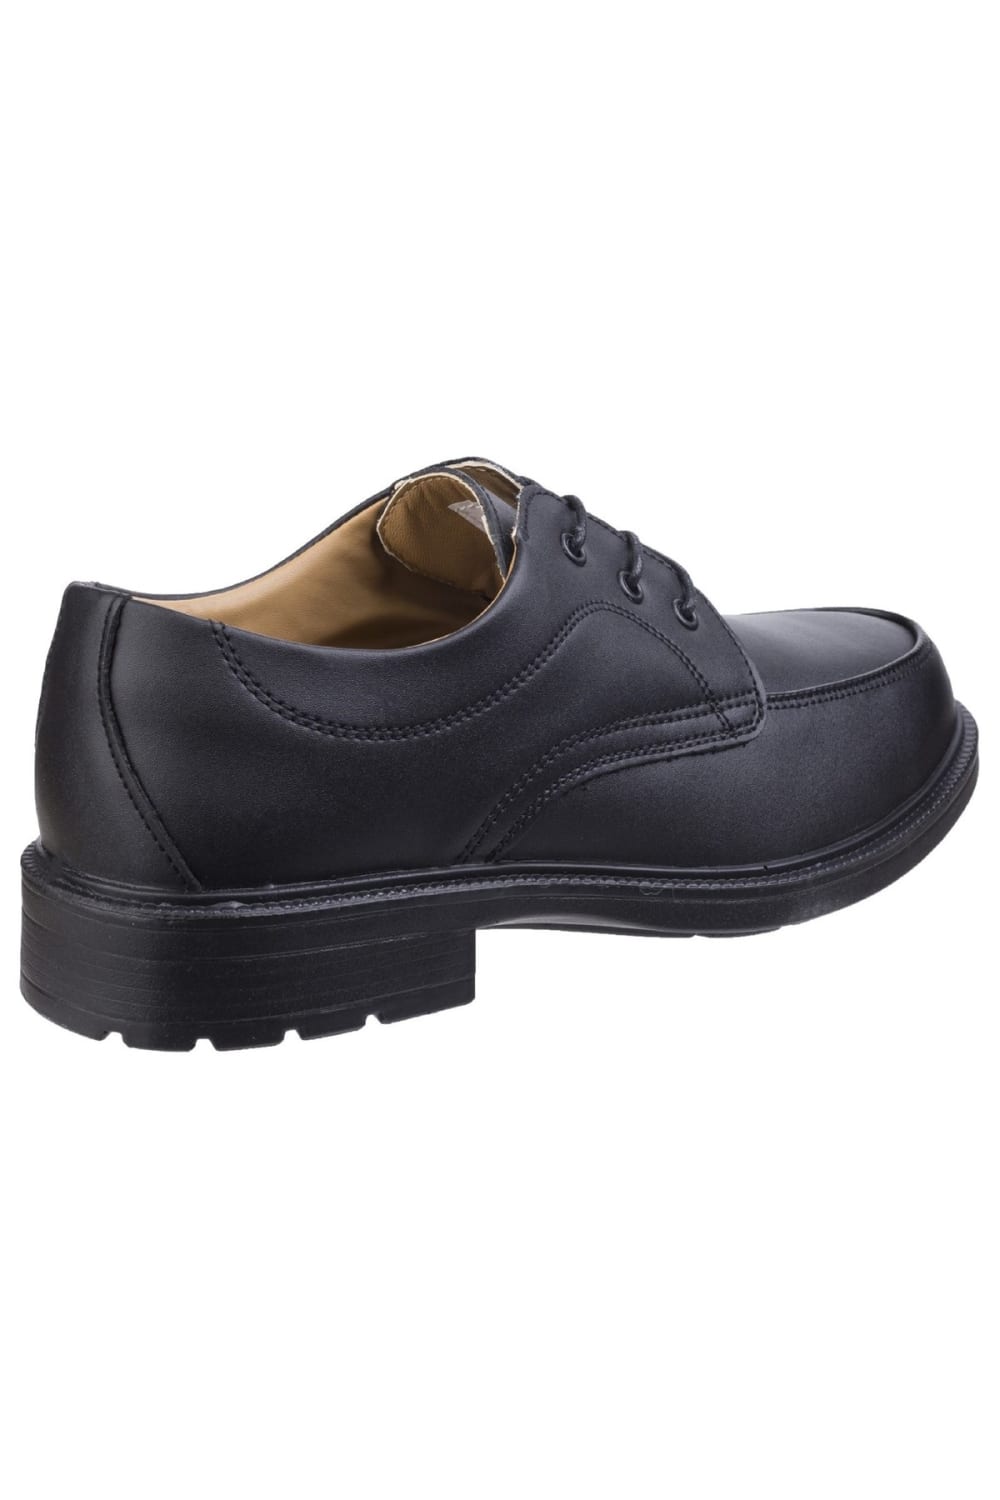 Amblers Safety FS65 Mens S1 P SRC Toe Cap Antistatic Gibson Safety Shoes Black 